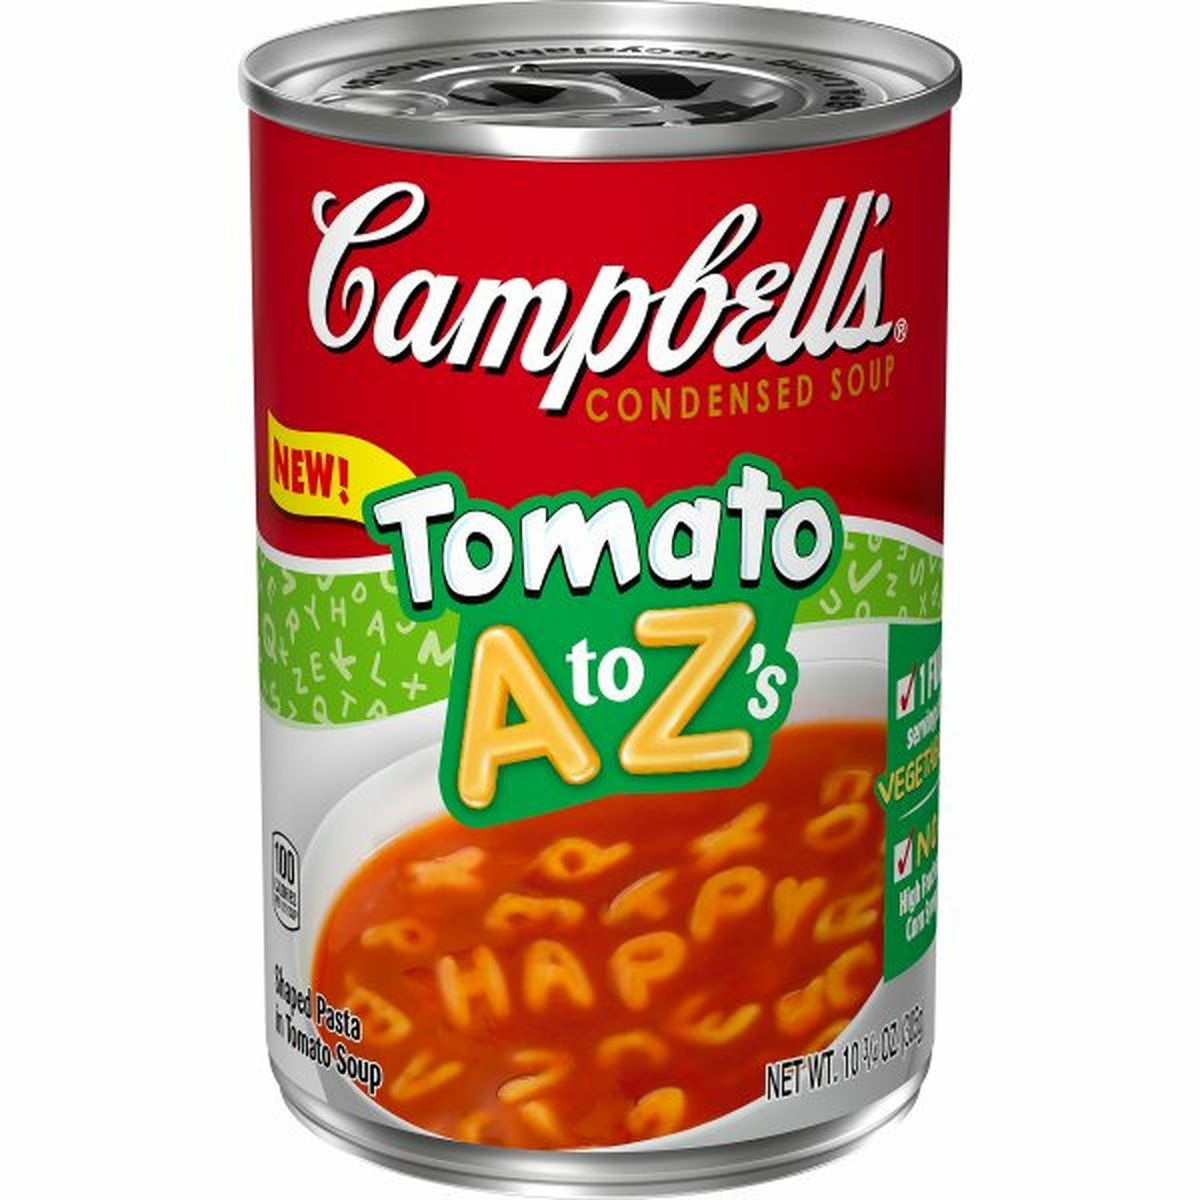 Calories in Campbell'ss Tomato Soup with Alphabet Pasta